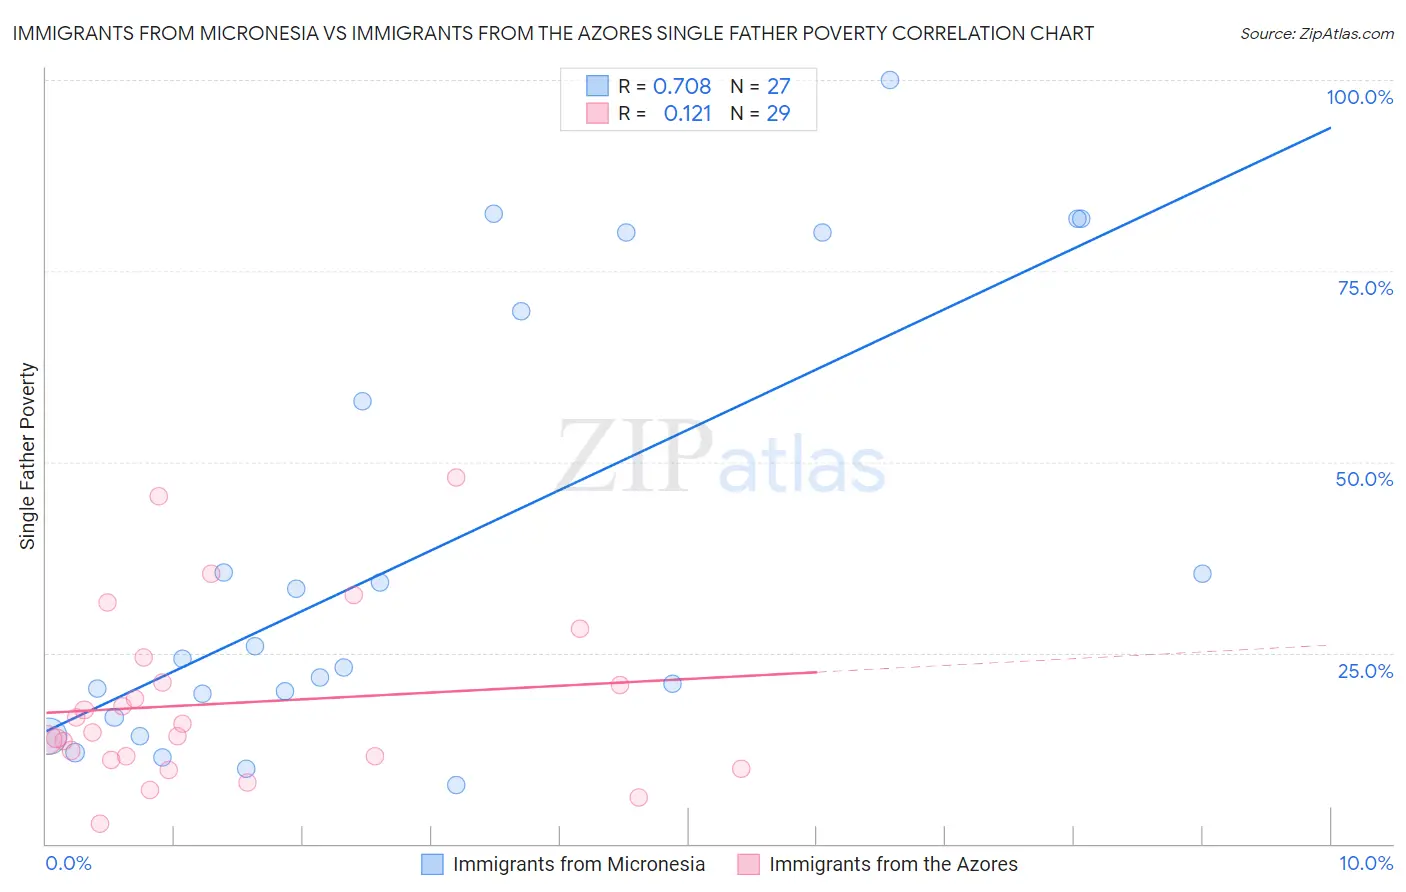 Immigrants from Micronesia vs Immigrants from the Azores Single Father Poverty